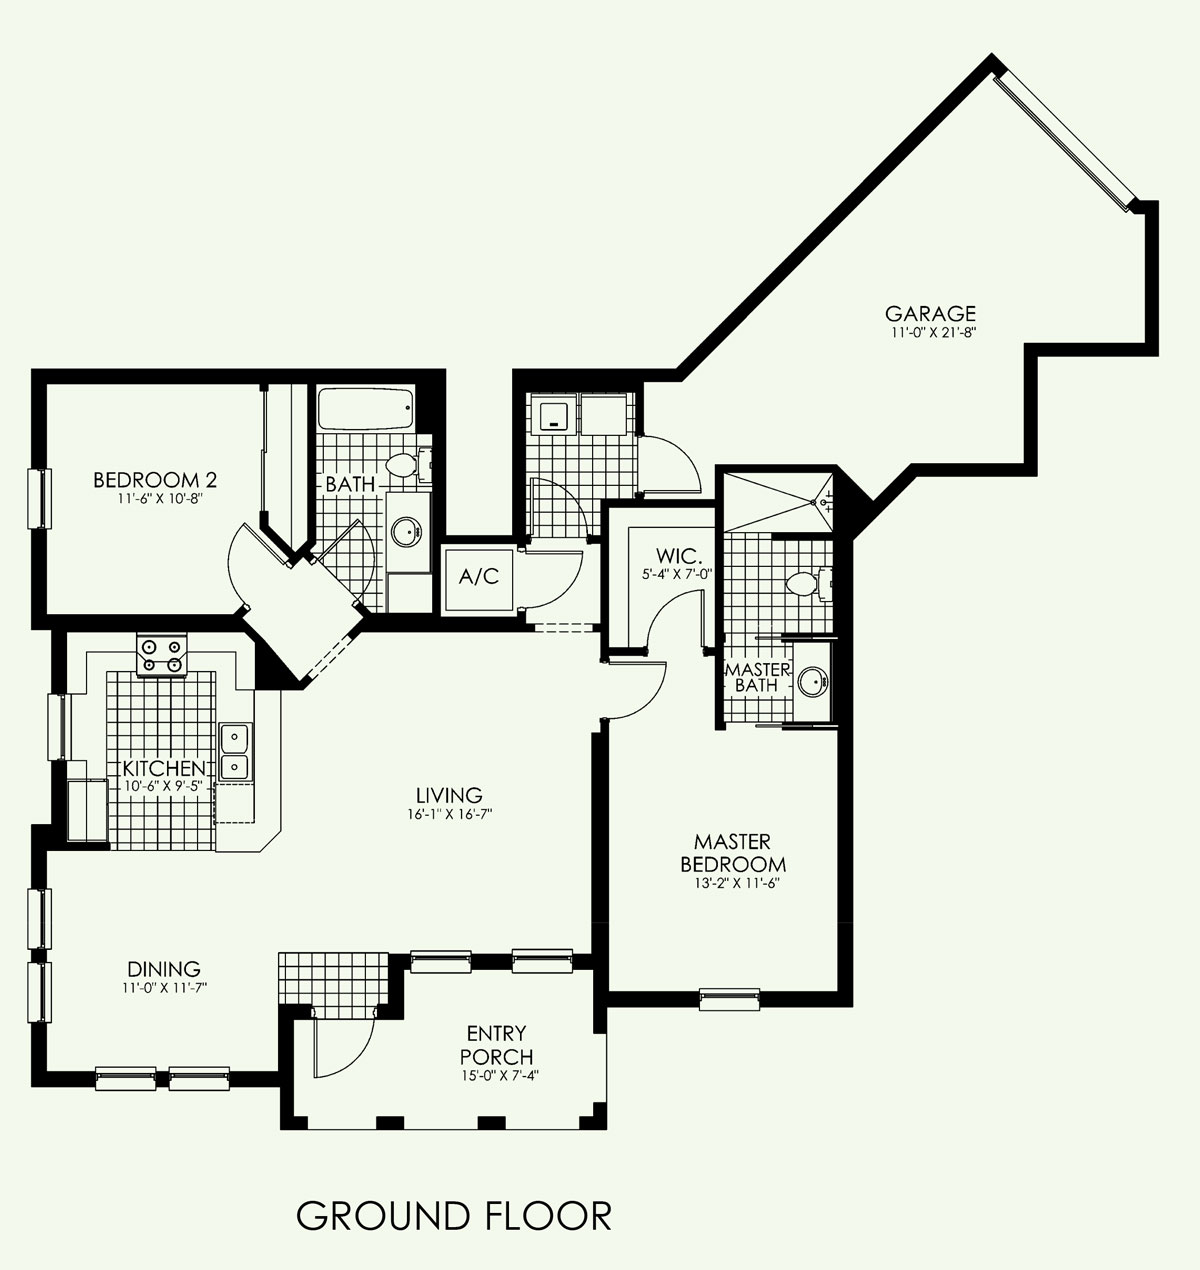 San Fernando Townhome Floor Plan in Paseo, 2 bedroom, 2 bath, living room, dining room, entry porch and 1-car garage